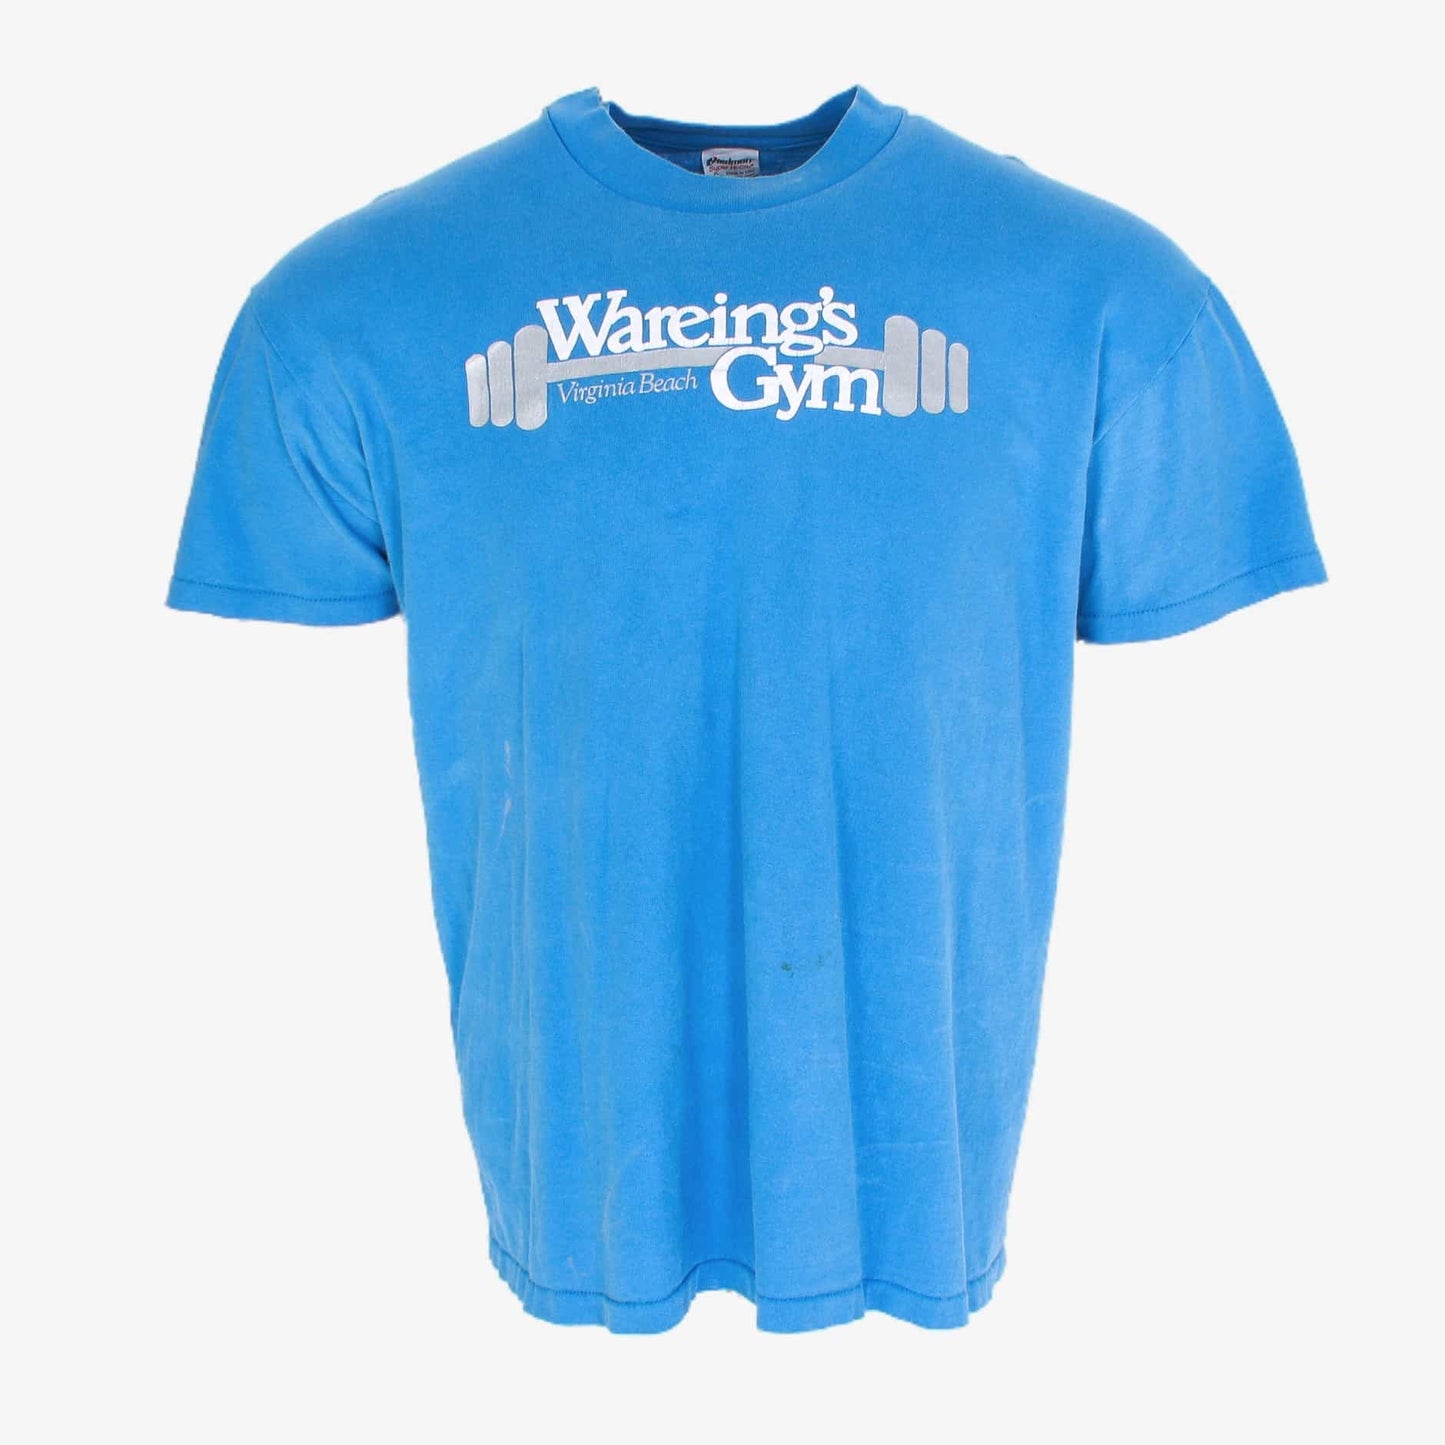 Vintage 'Wareings Gym' T-Shirt - American Madness